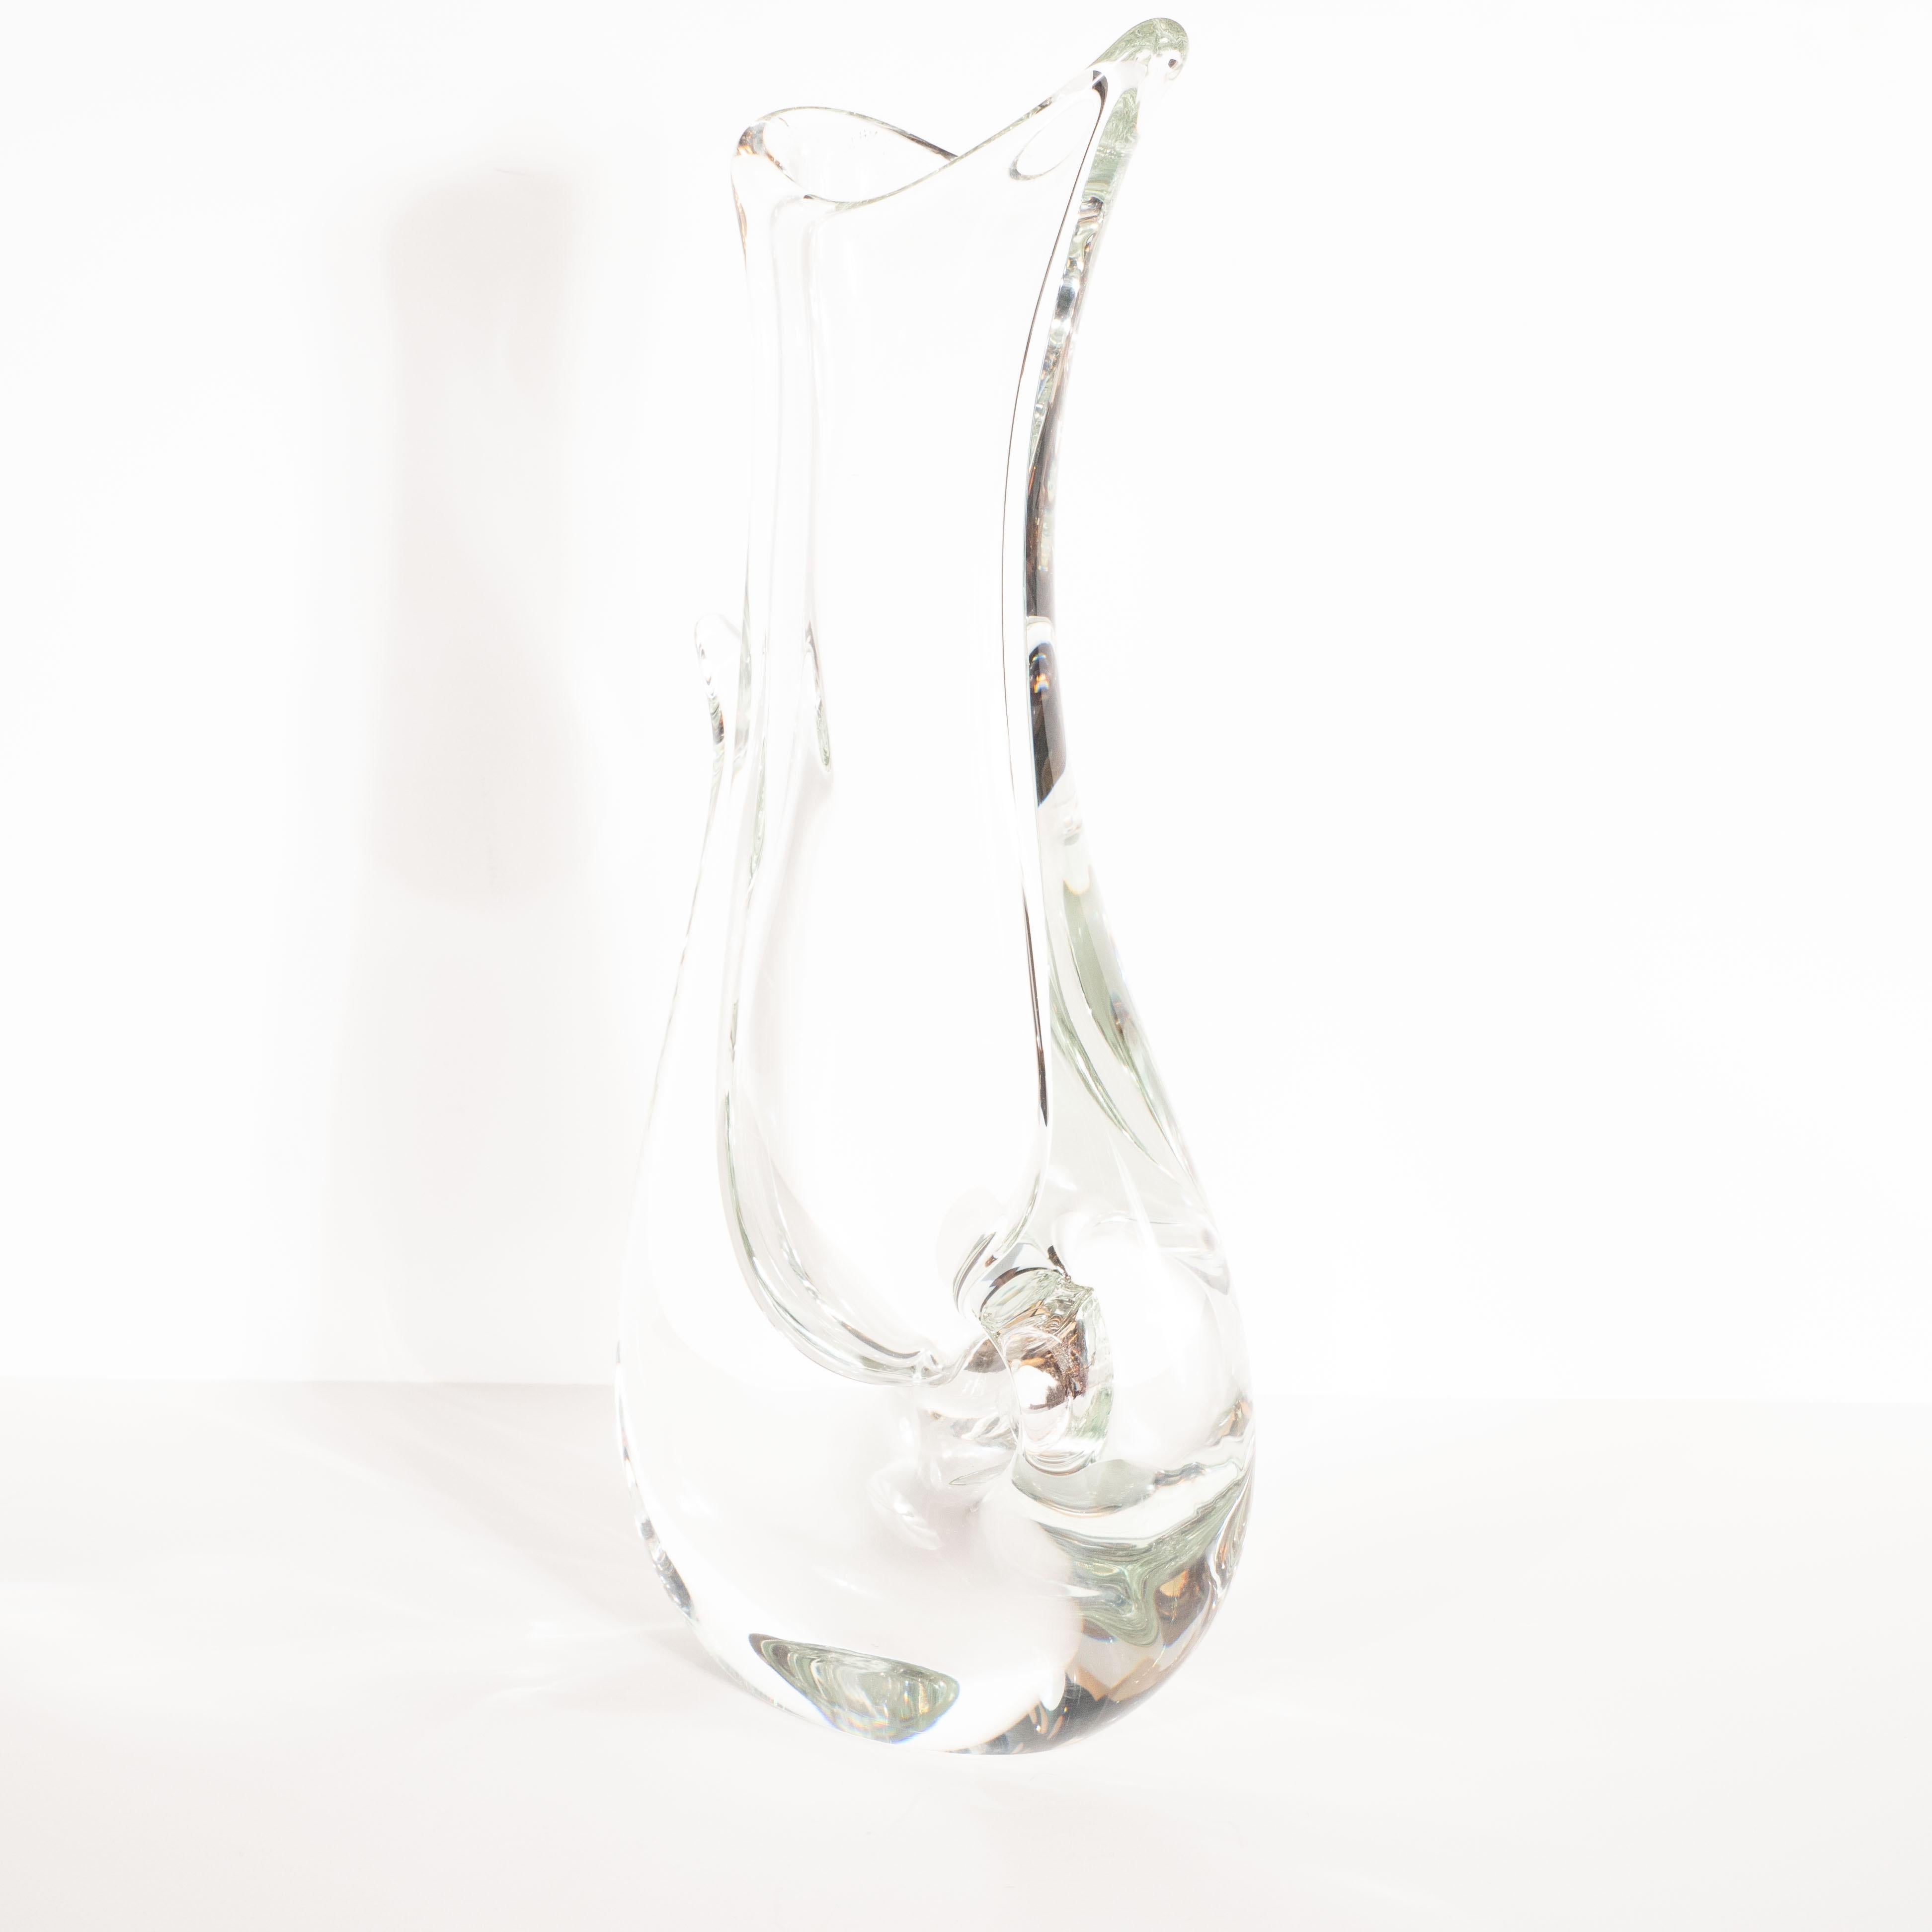 This stunning and graphic vase was realized in Murano, Italy- the island off the coast of Venice renowned for centuries for its superlative glass production- circa 1970 by the esteemed studio Licio Zanetti. Realized in handblown translucent Murano